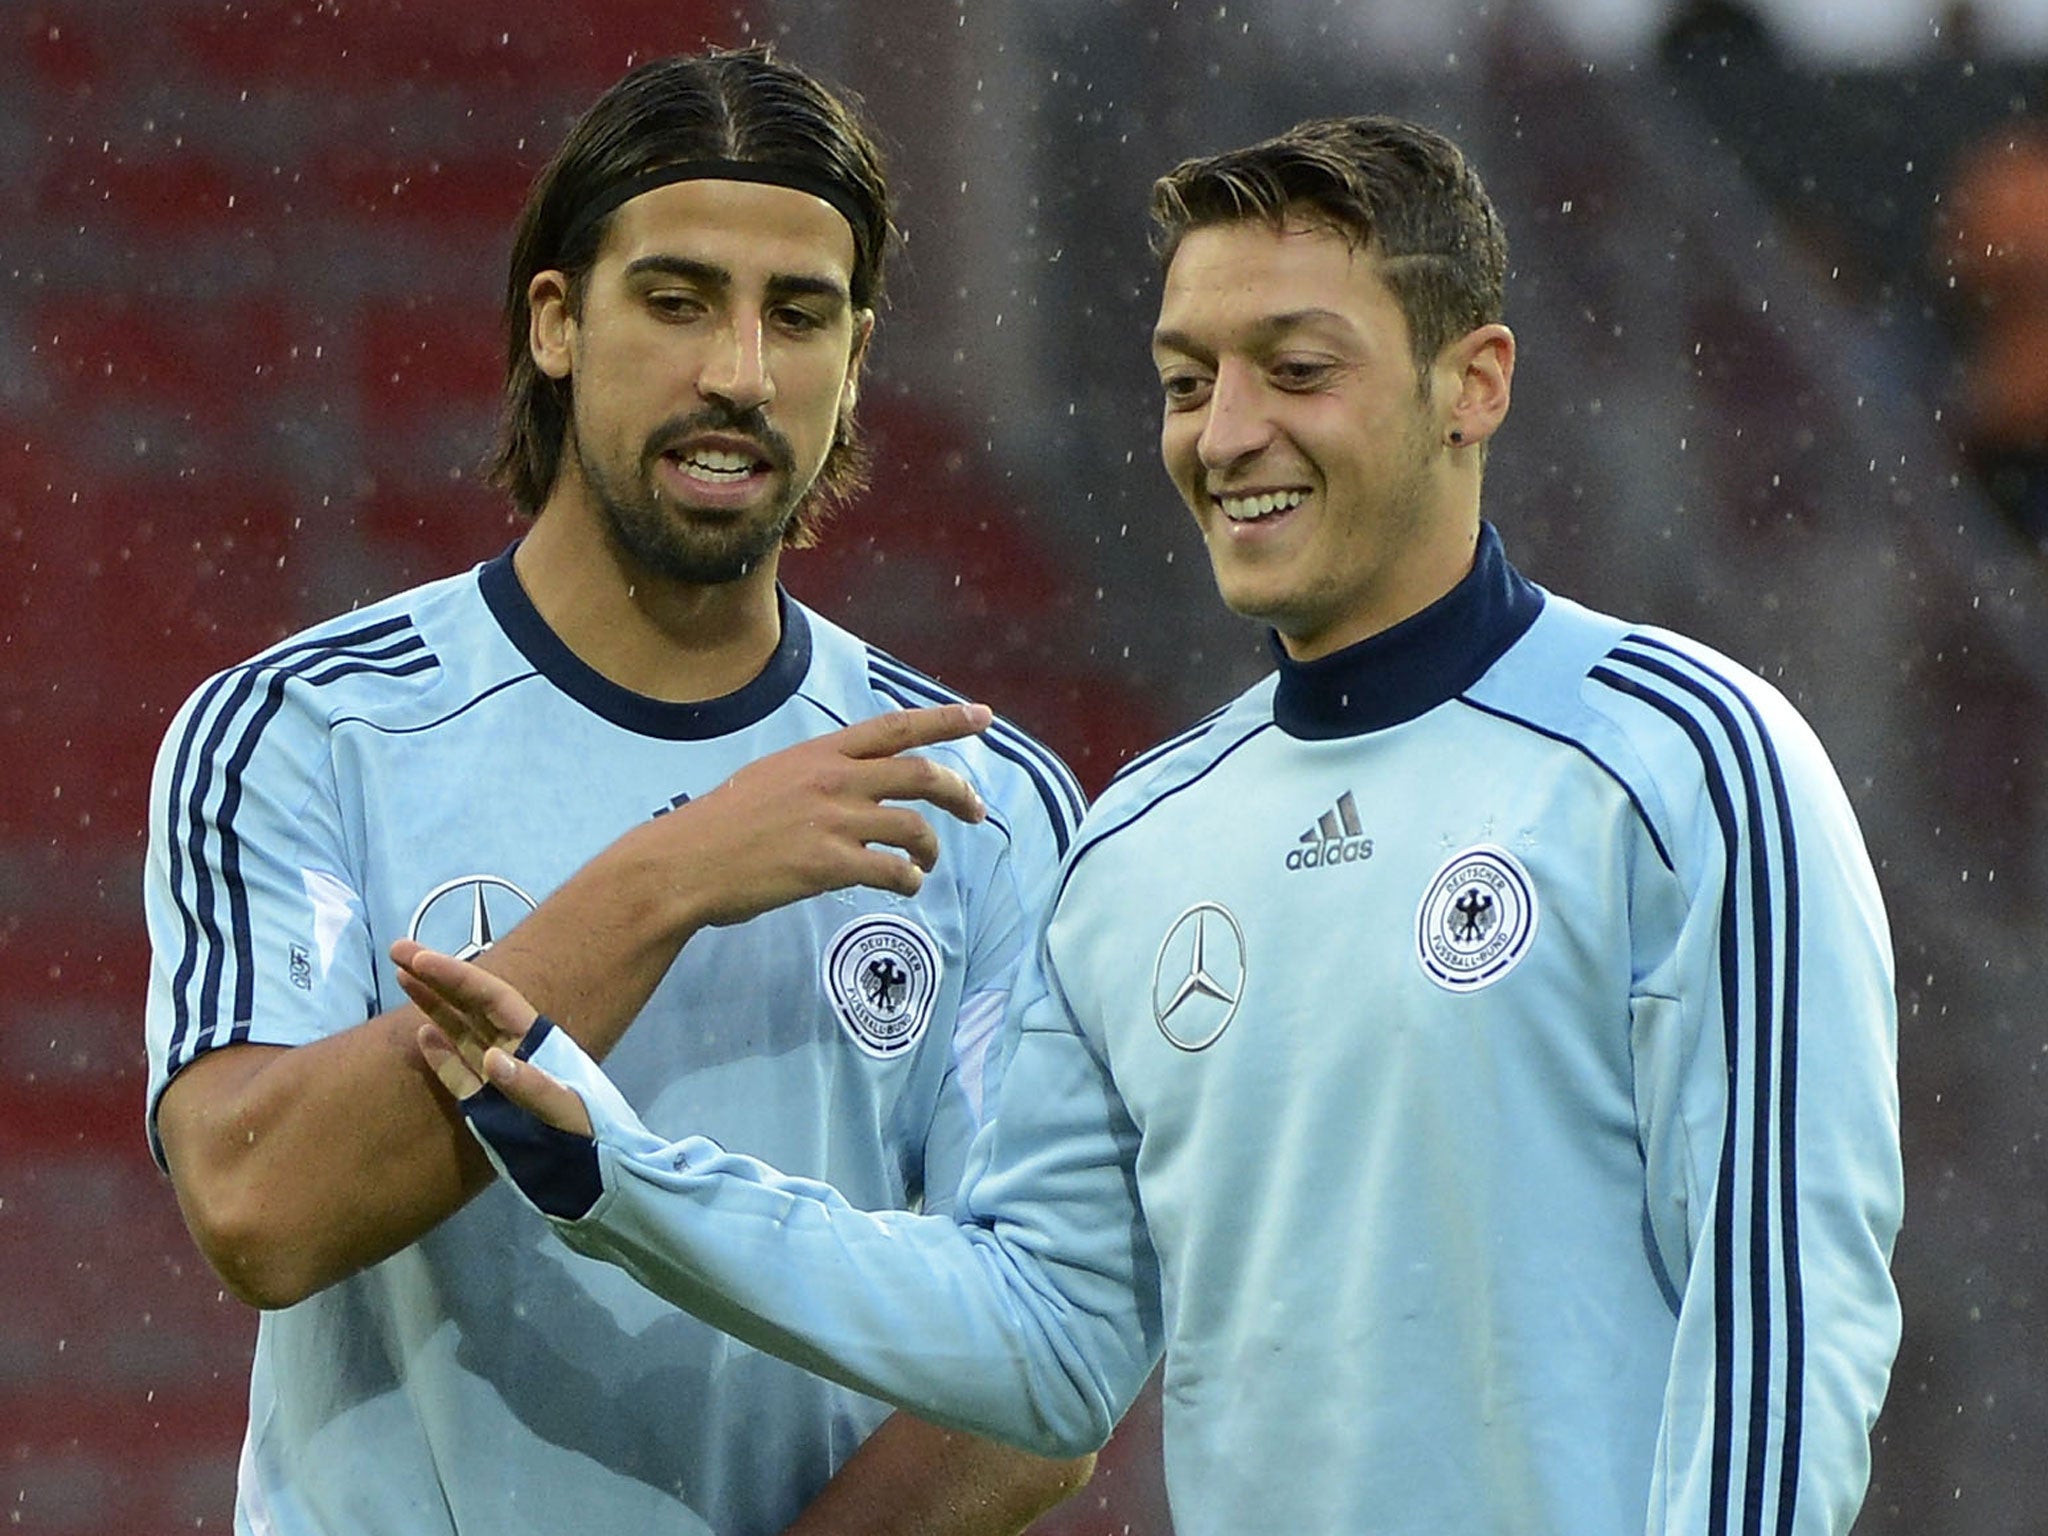 Sami Khedira (left) and Mesut Ozil (right) in conversation during training with Germany